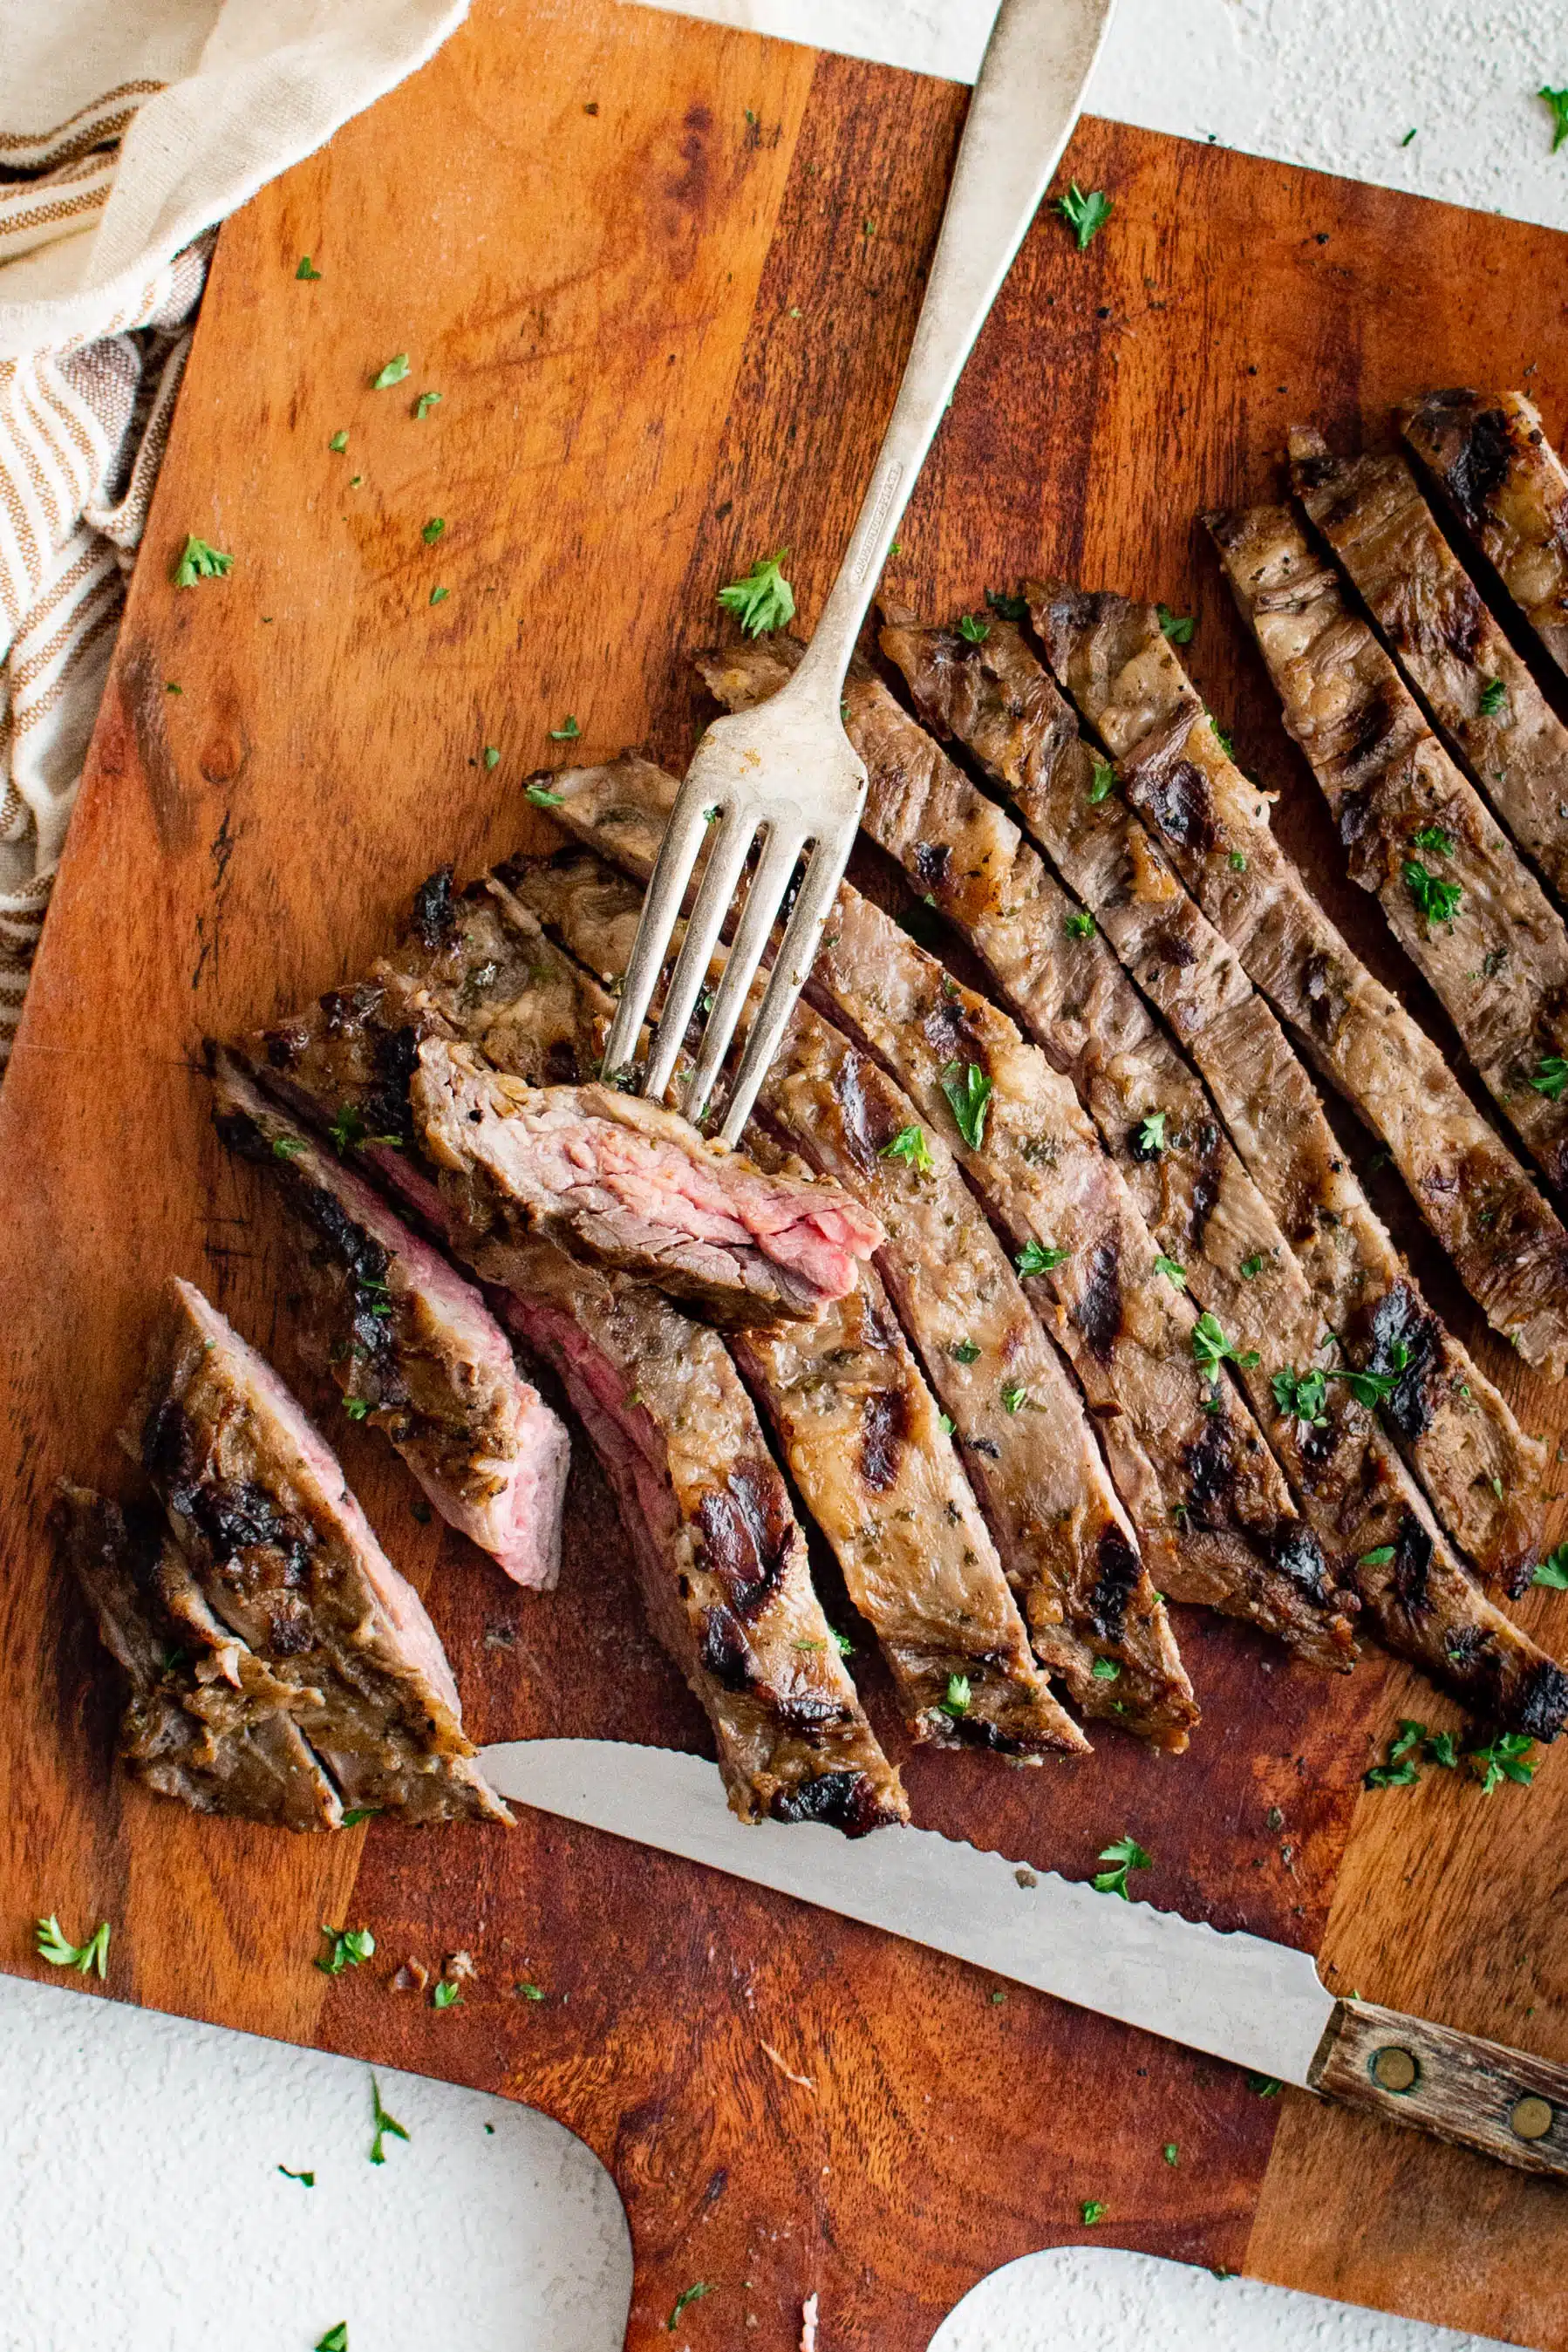 Marinated and grilled skirt steak sliced against the grain on a large cutting board.